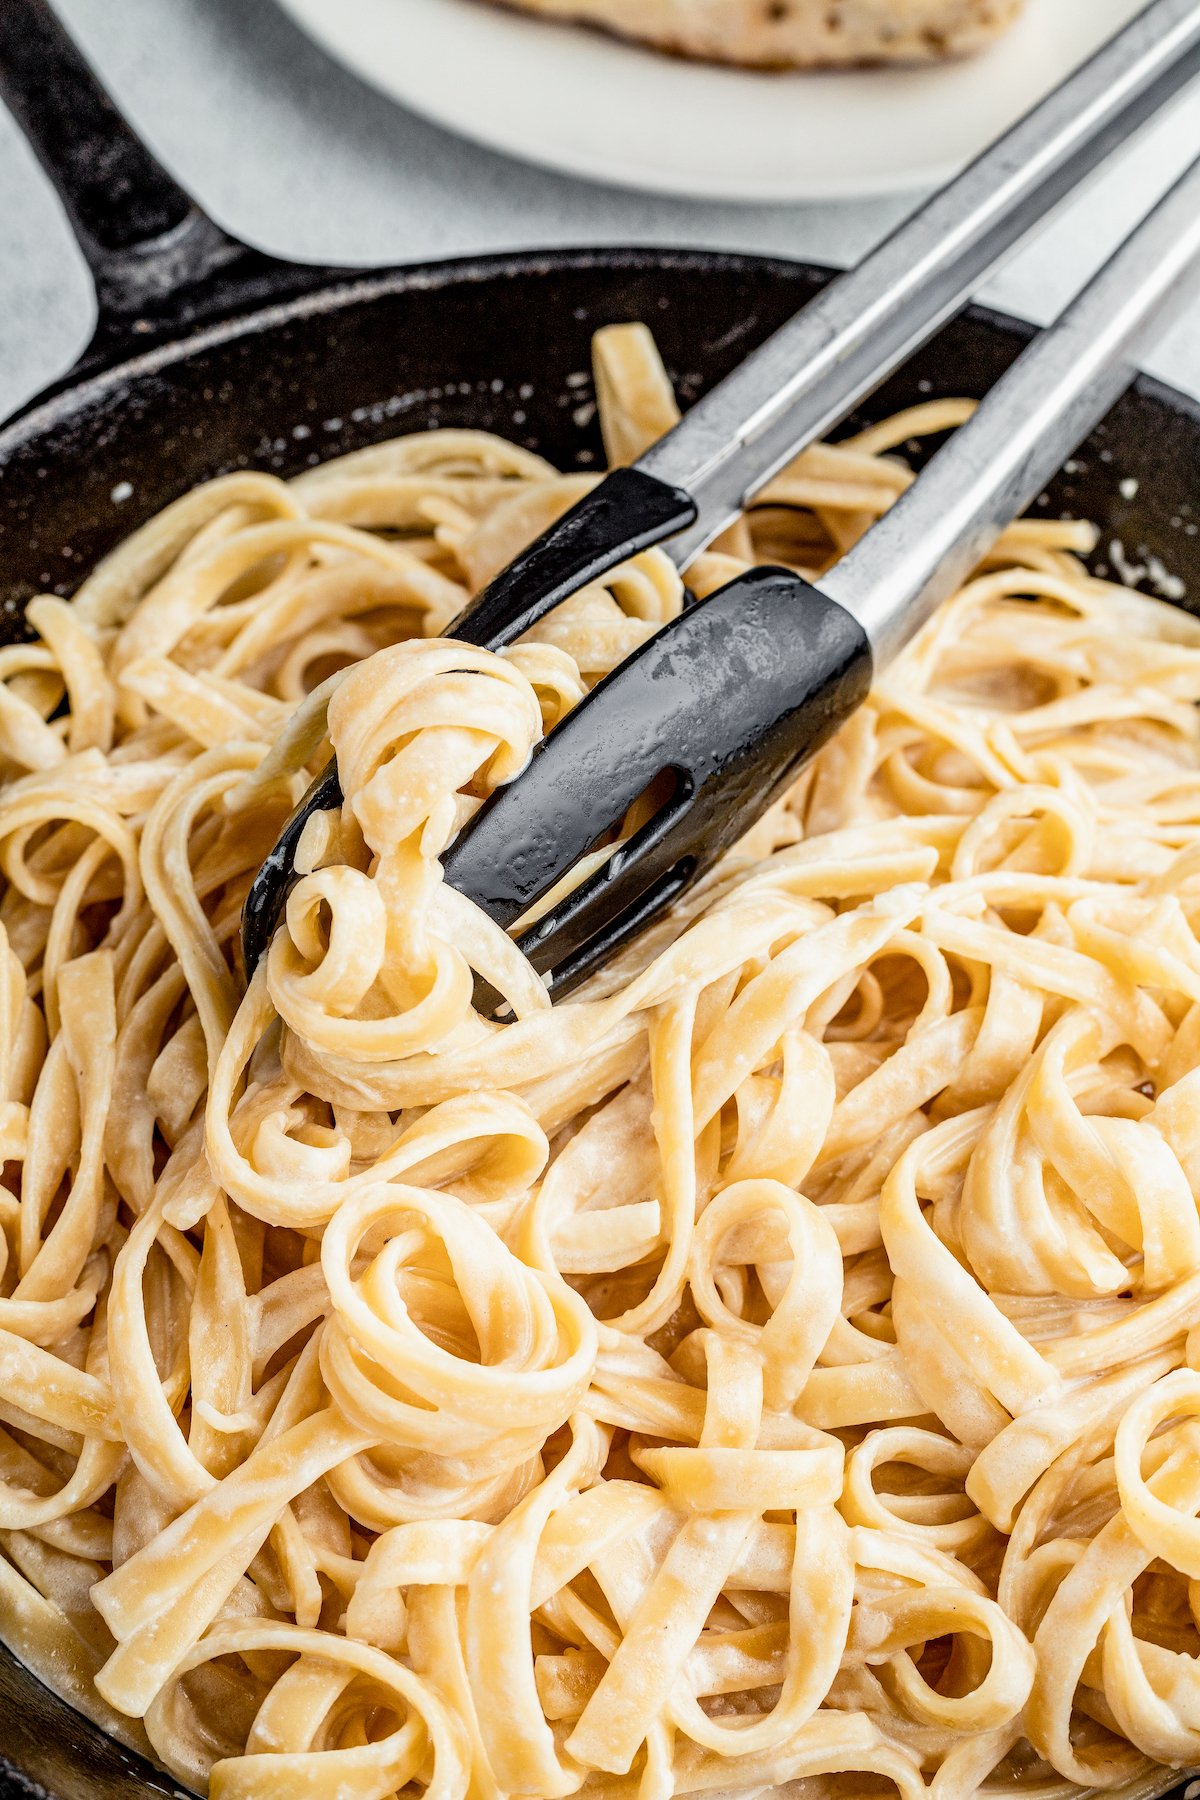 Pasta being tossed with tongs to mix in the cream sauce.